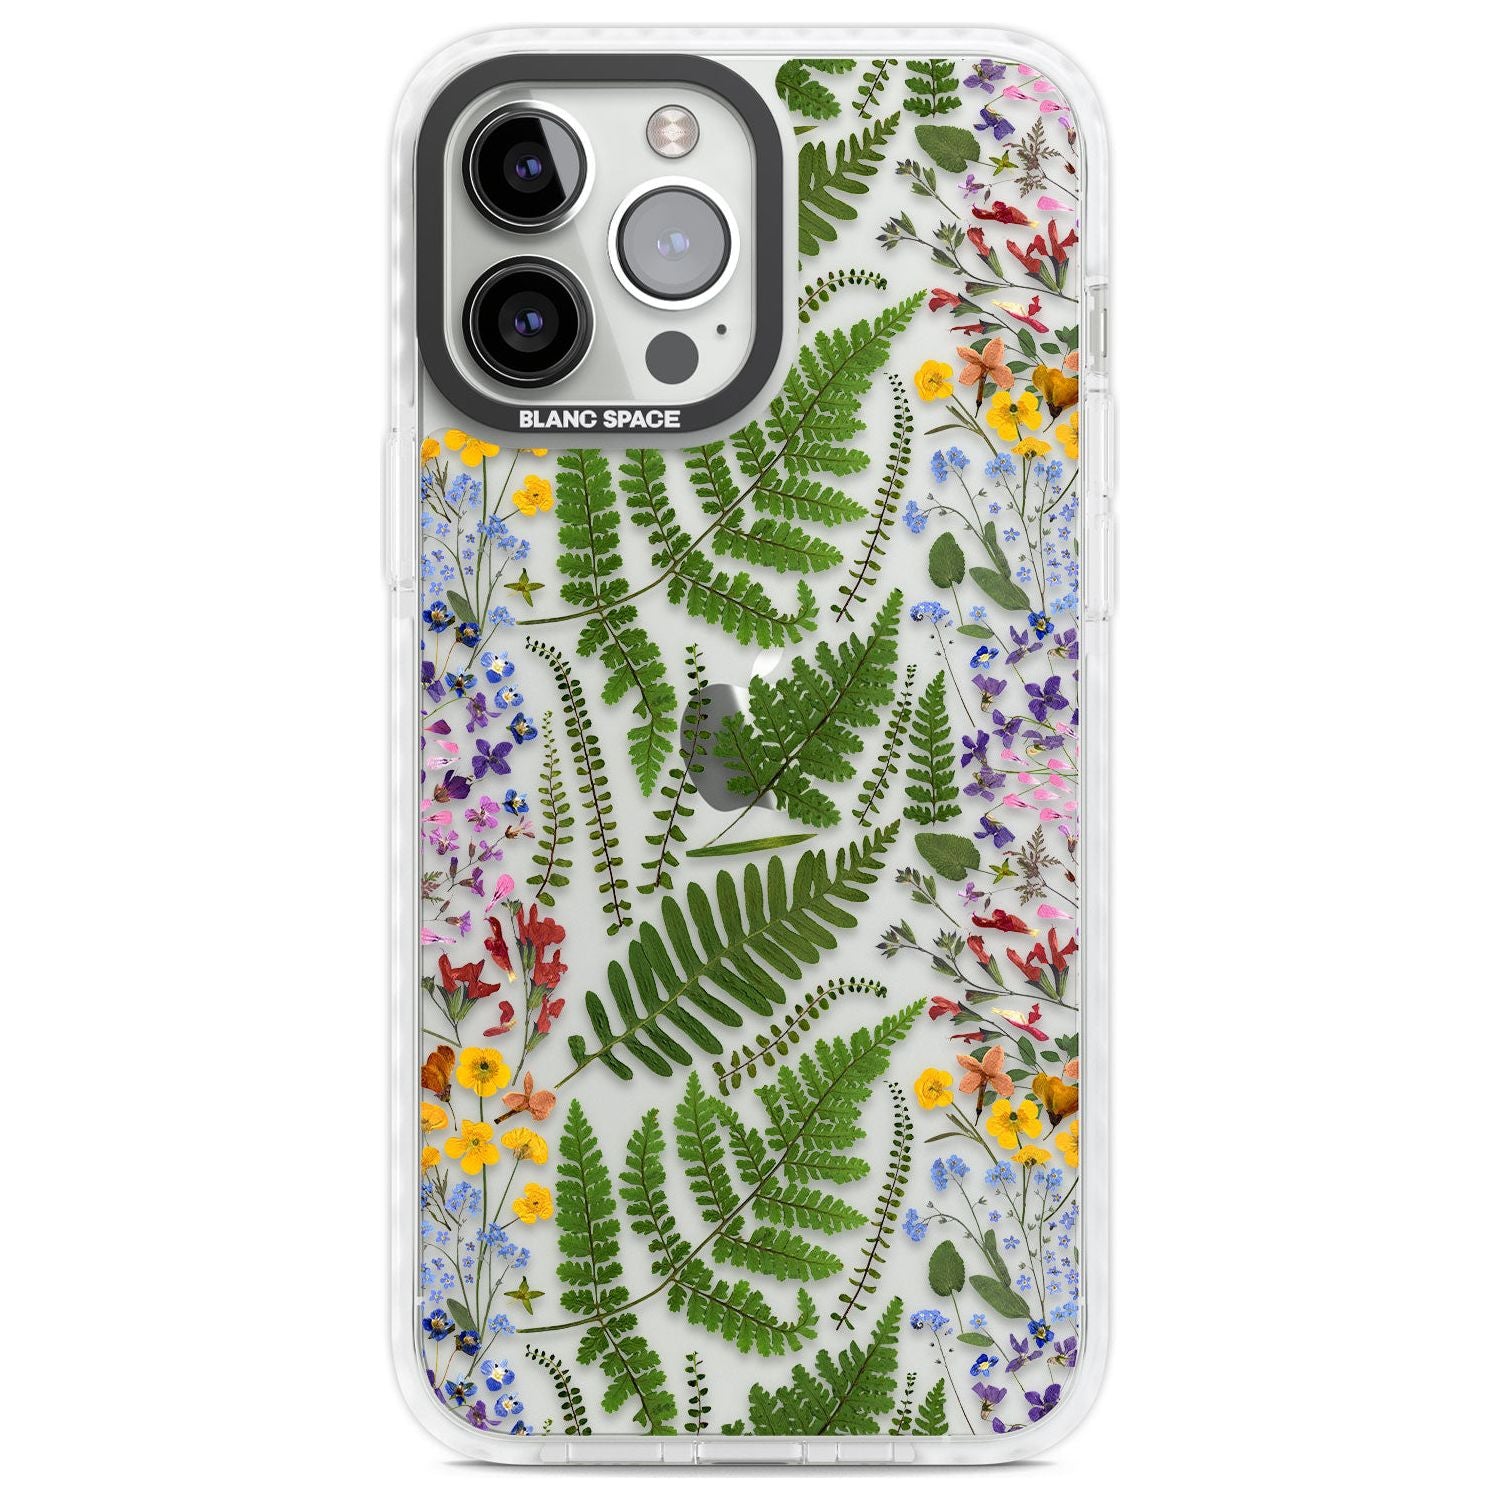 Busy Floral and Fern Design Phone Case iPhone 13 Pro Max / Impact Case,iPhone 14 Pro Max / Impact Case Blanc Space